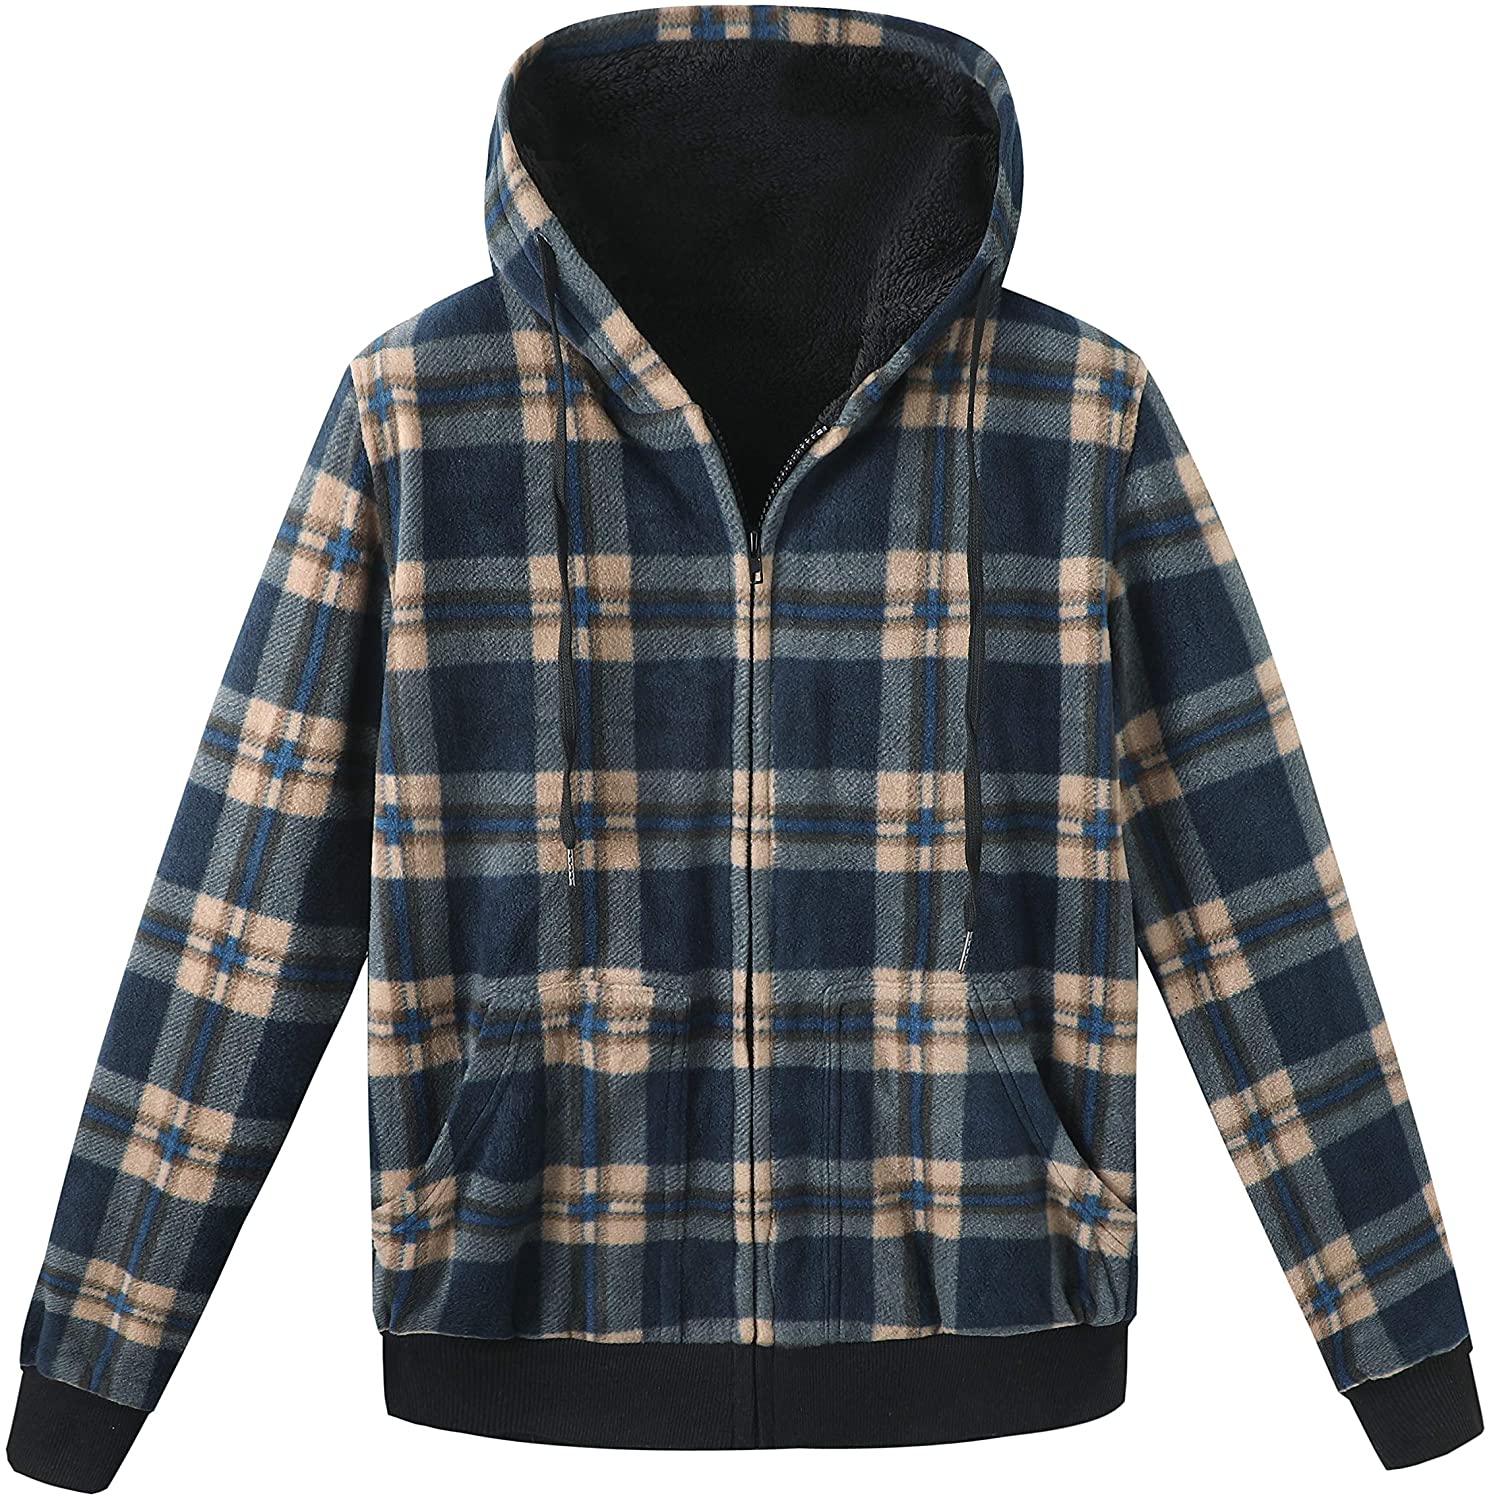 ZENTHACE Womens Sherpa Lined Flannel Jacket Full Zip Up Hooded Flannel  Plaid Shirt Jacket with Side Pockets